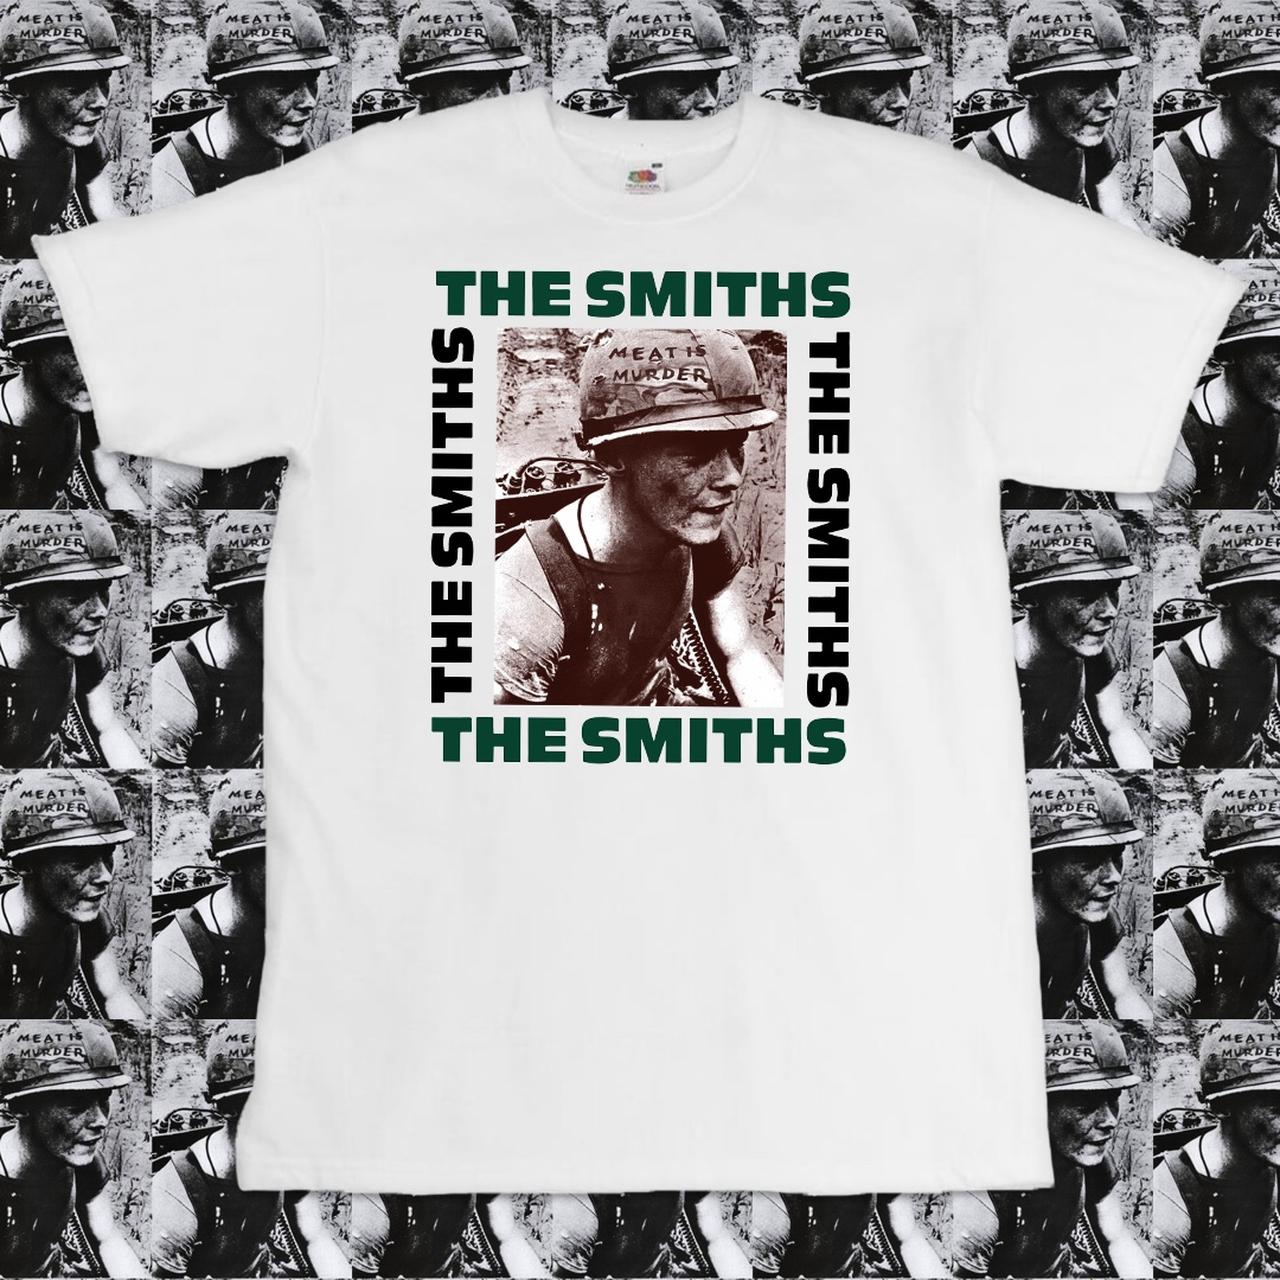 The Smiths ‘Meat Is Murder’ 1985 Tour T-Shirt...